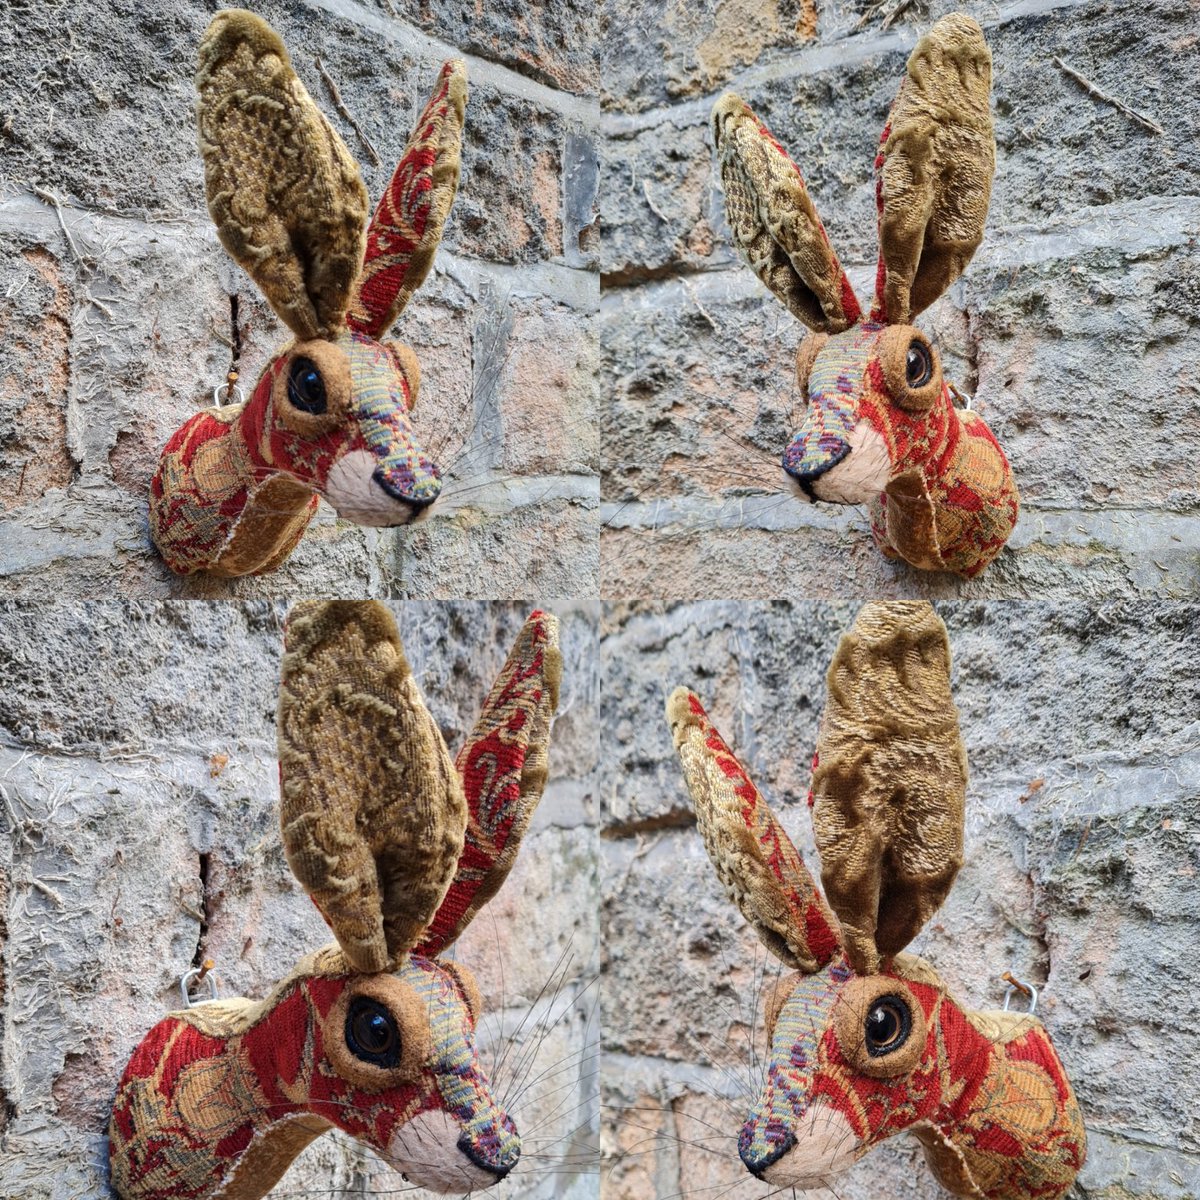 Latest handmade hare in vintage upholstery fabrics. In my Etsy shop now etsy.com/shop/thecrafte… #handmade #hare #craftedcreatures #animalfriendly #textilesculpture